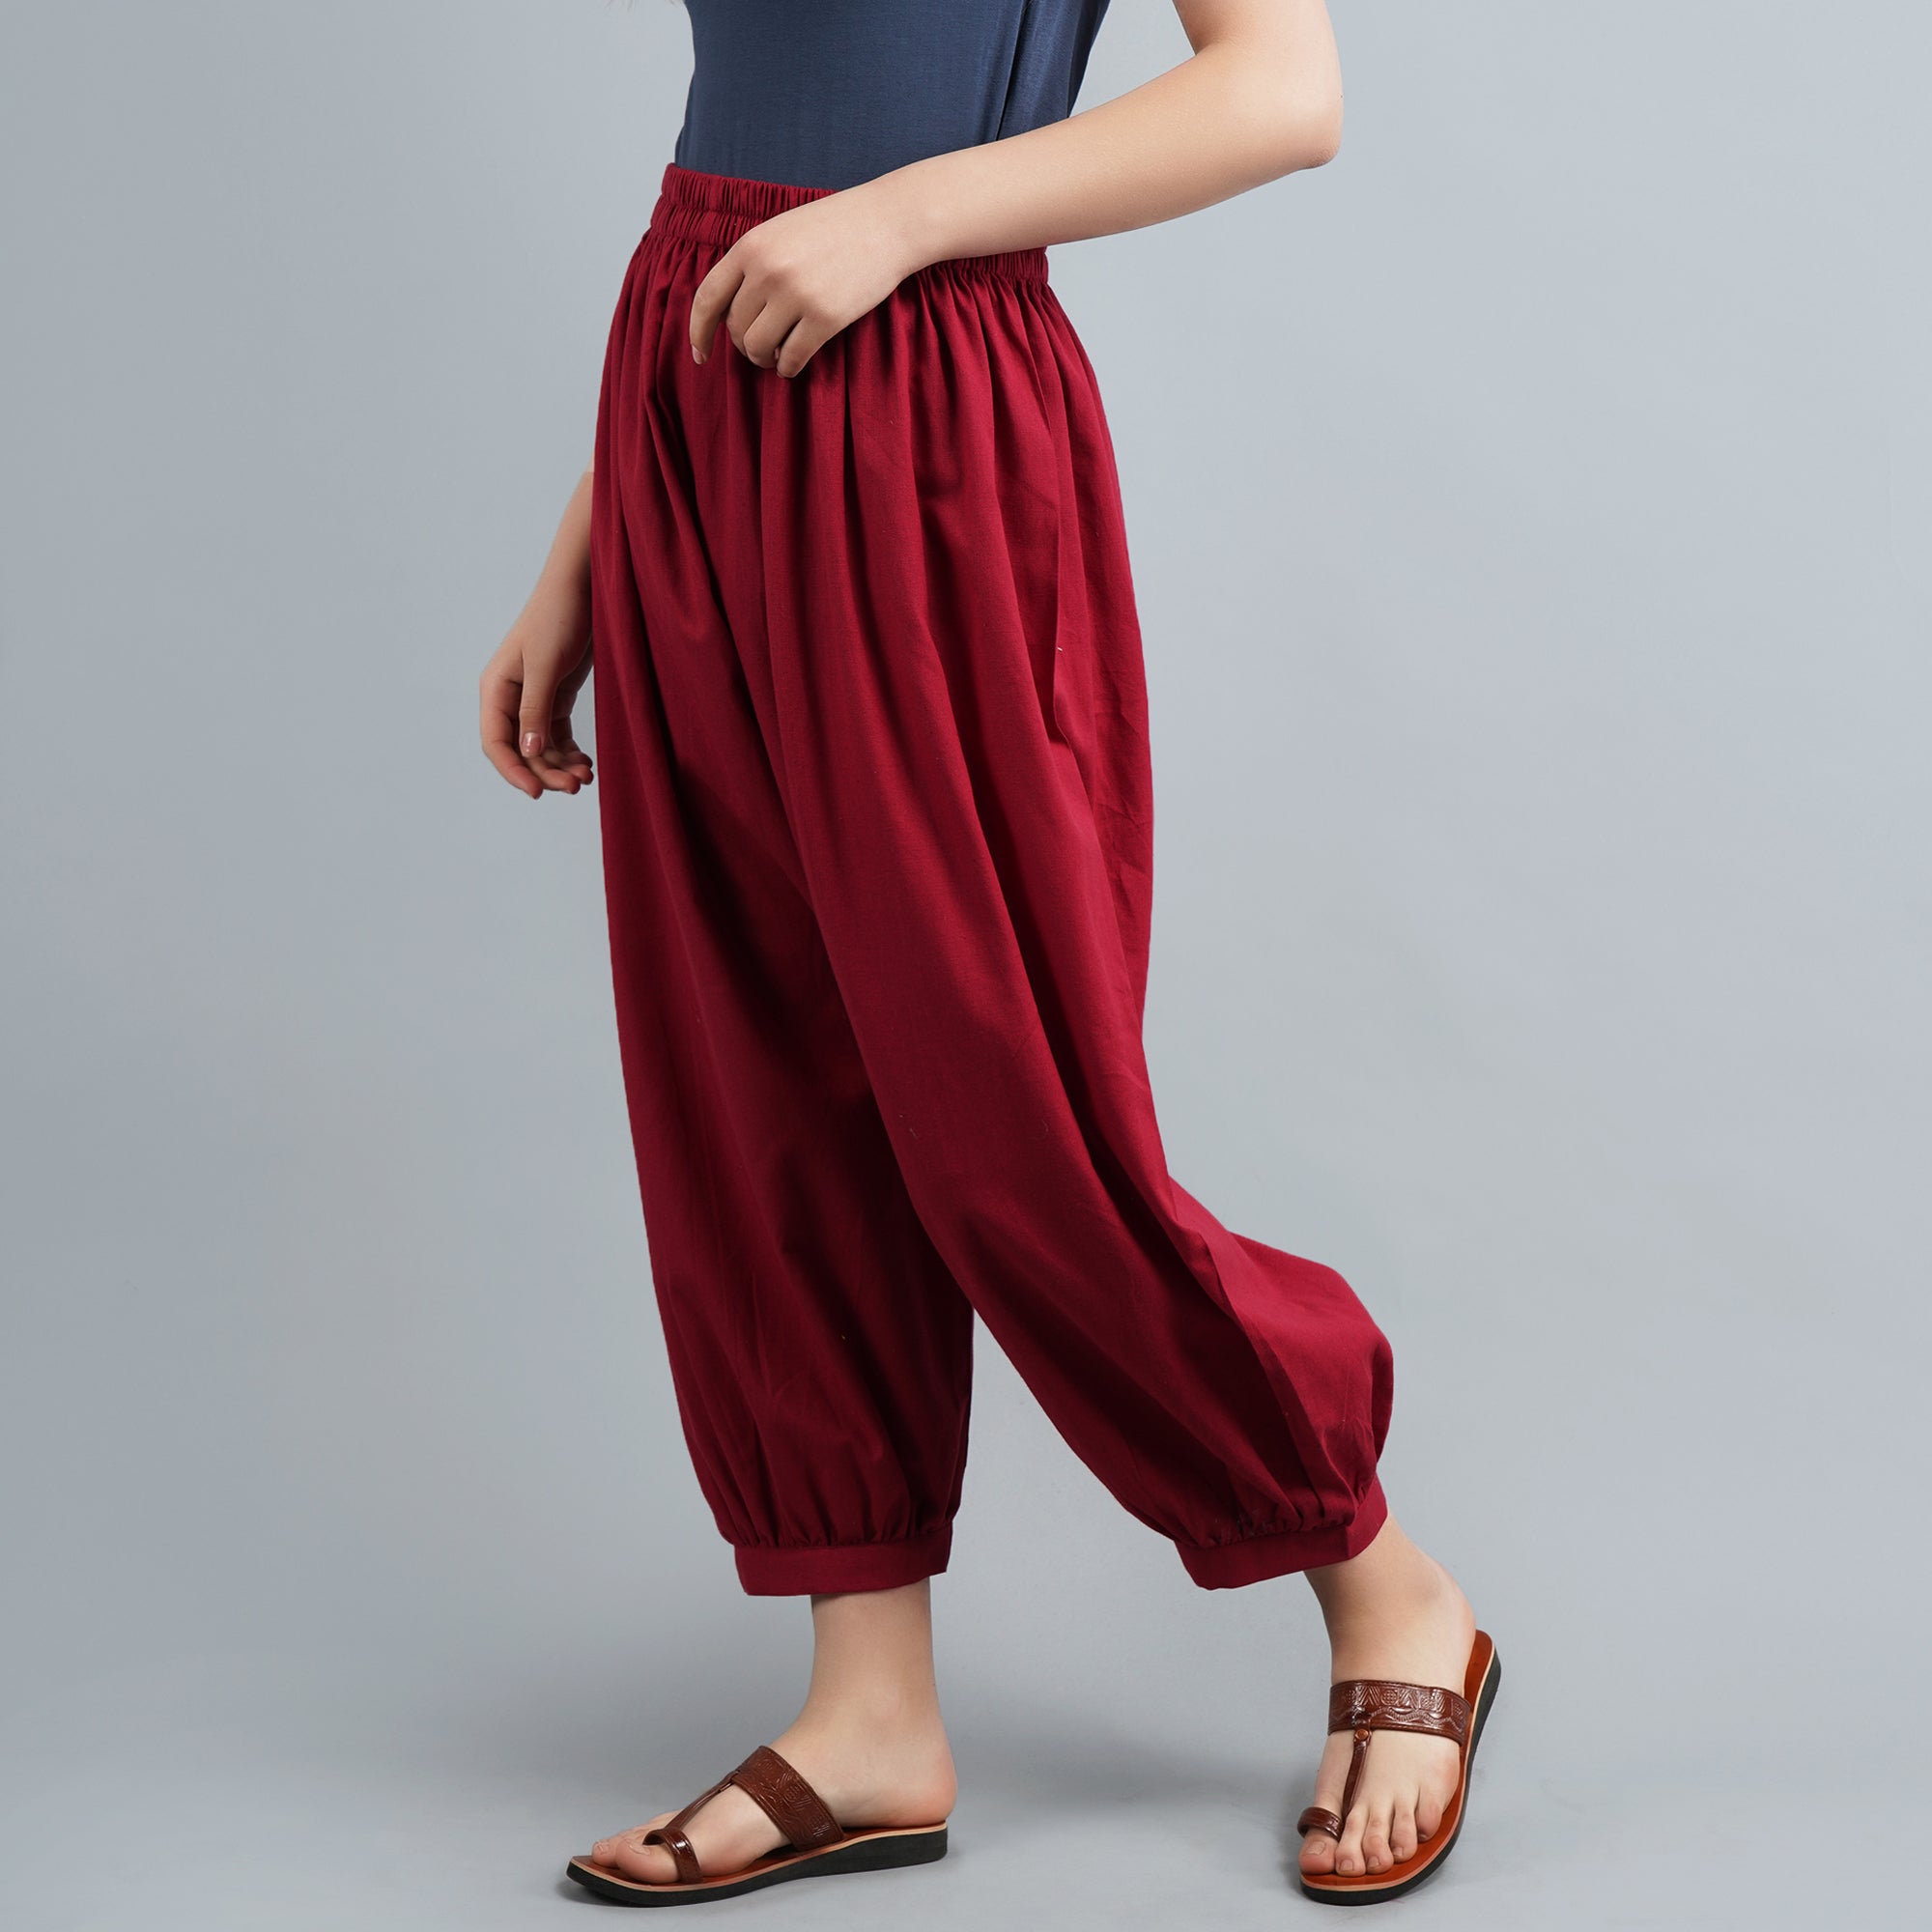 Buy Trousers For Women amp Pants Online In India  Beyoung